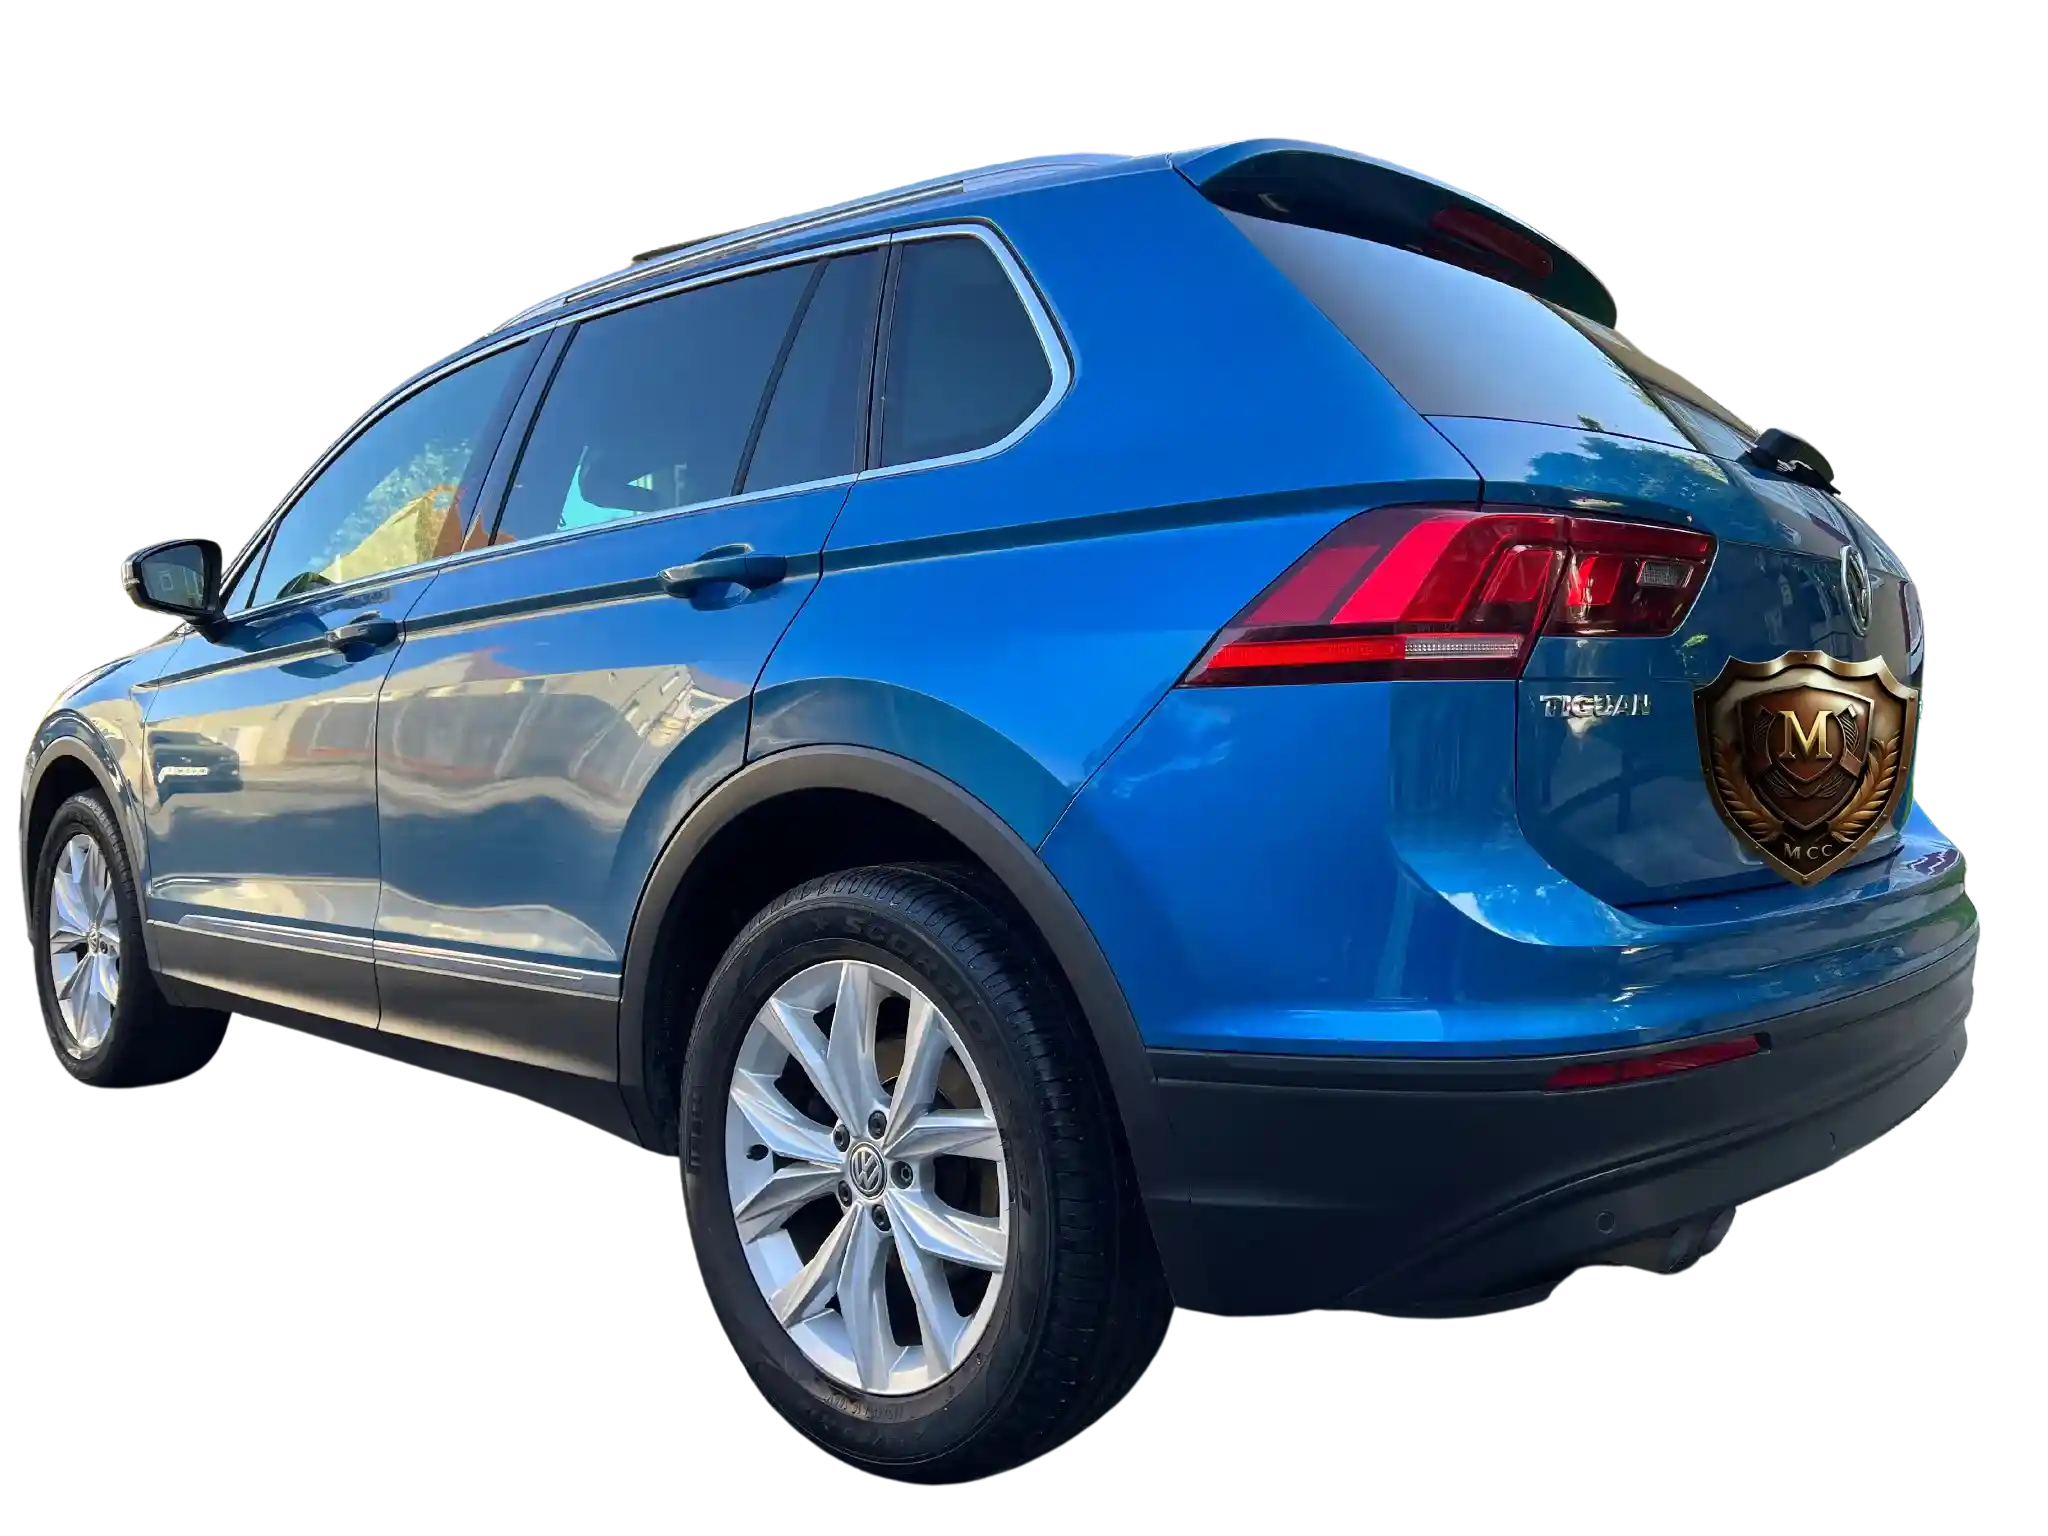 Eco-friendly waterless valeting of a Volkswagen Tiguan 4Motion in Guildford, enhancing its rugged elegance and reflecting corporate environmental values.